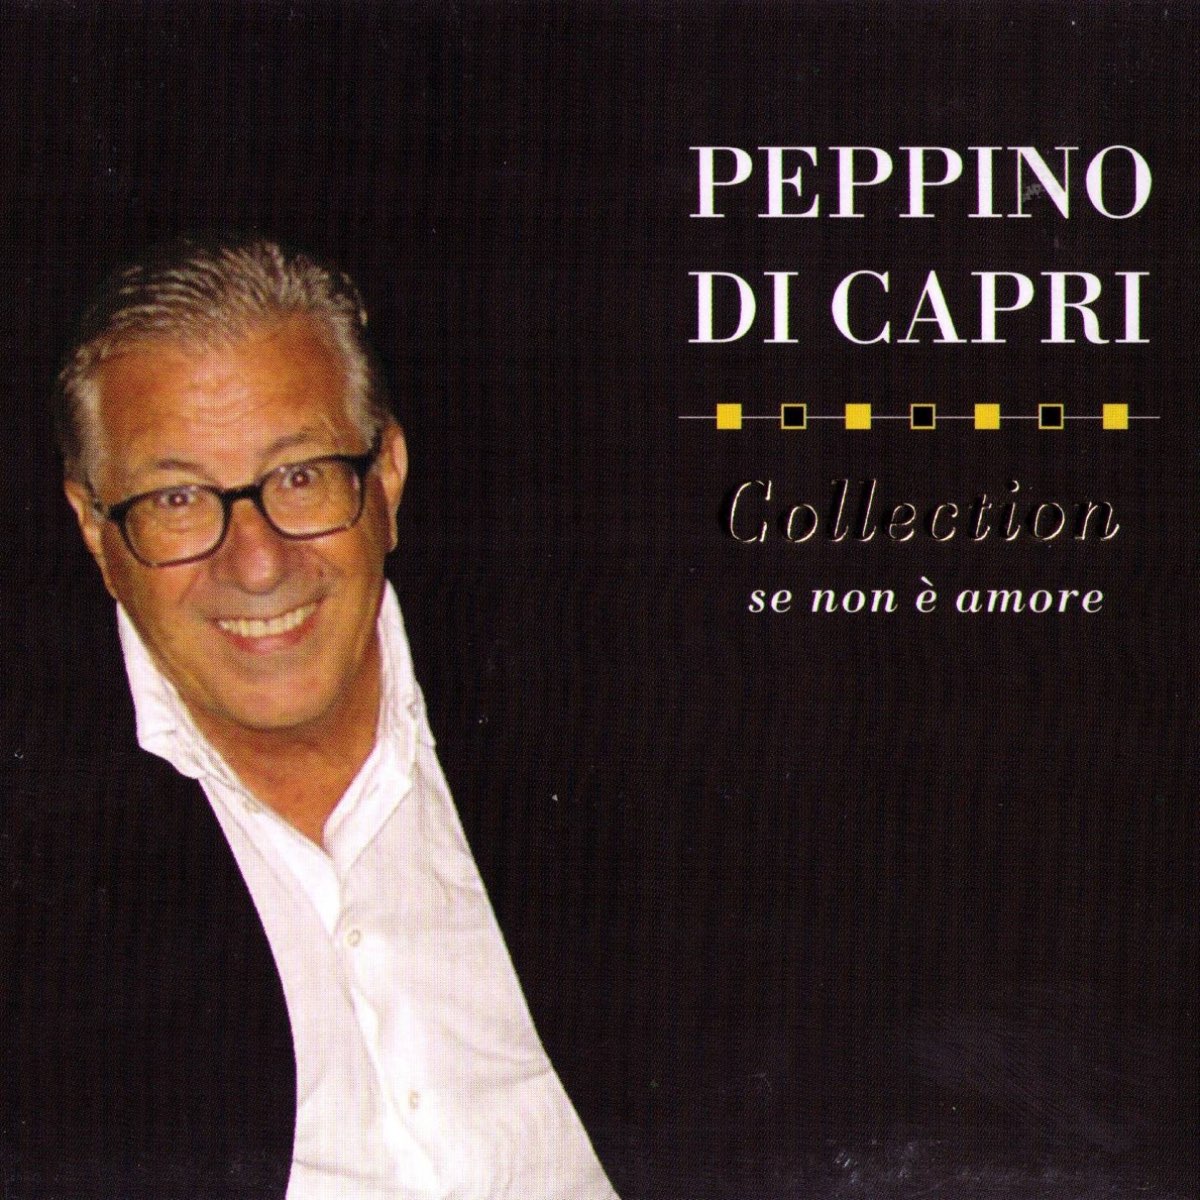 Peppino. Capri Songs. Peppino PNG. Se collection